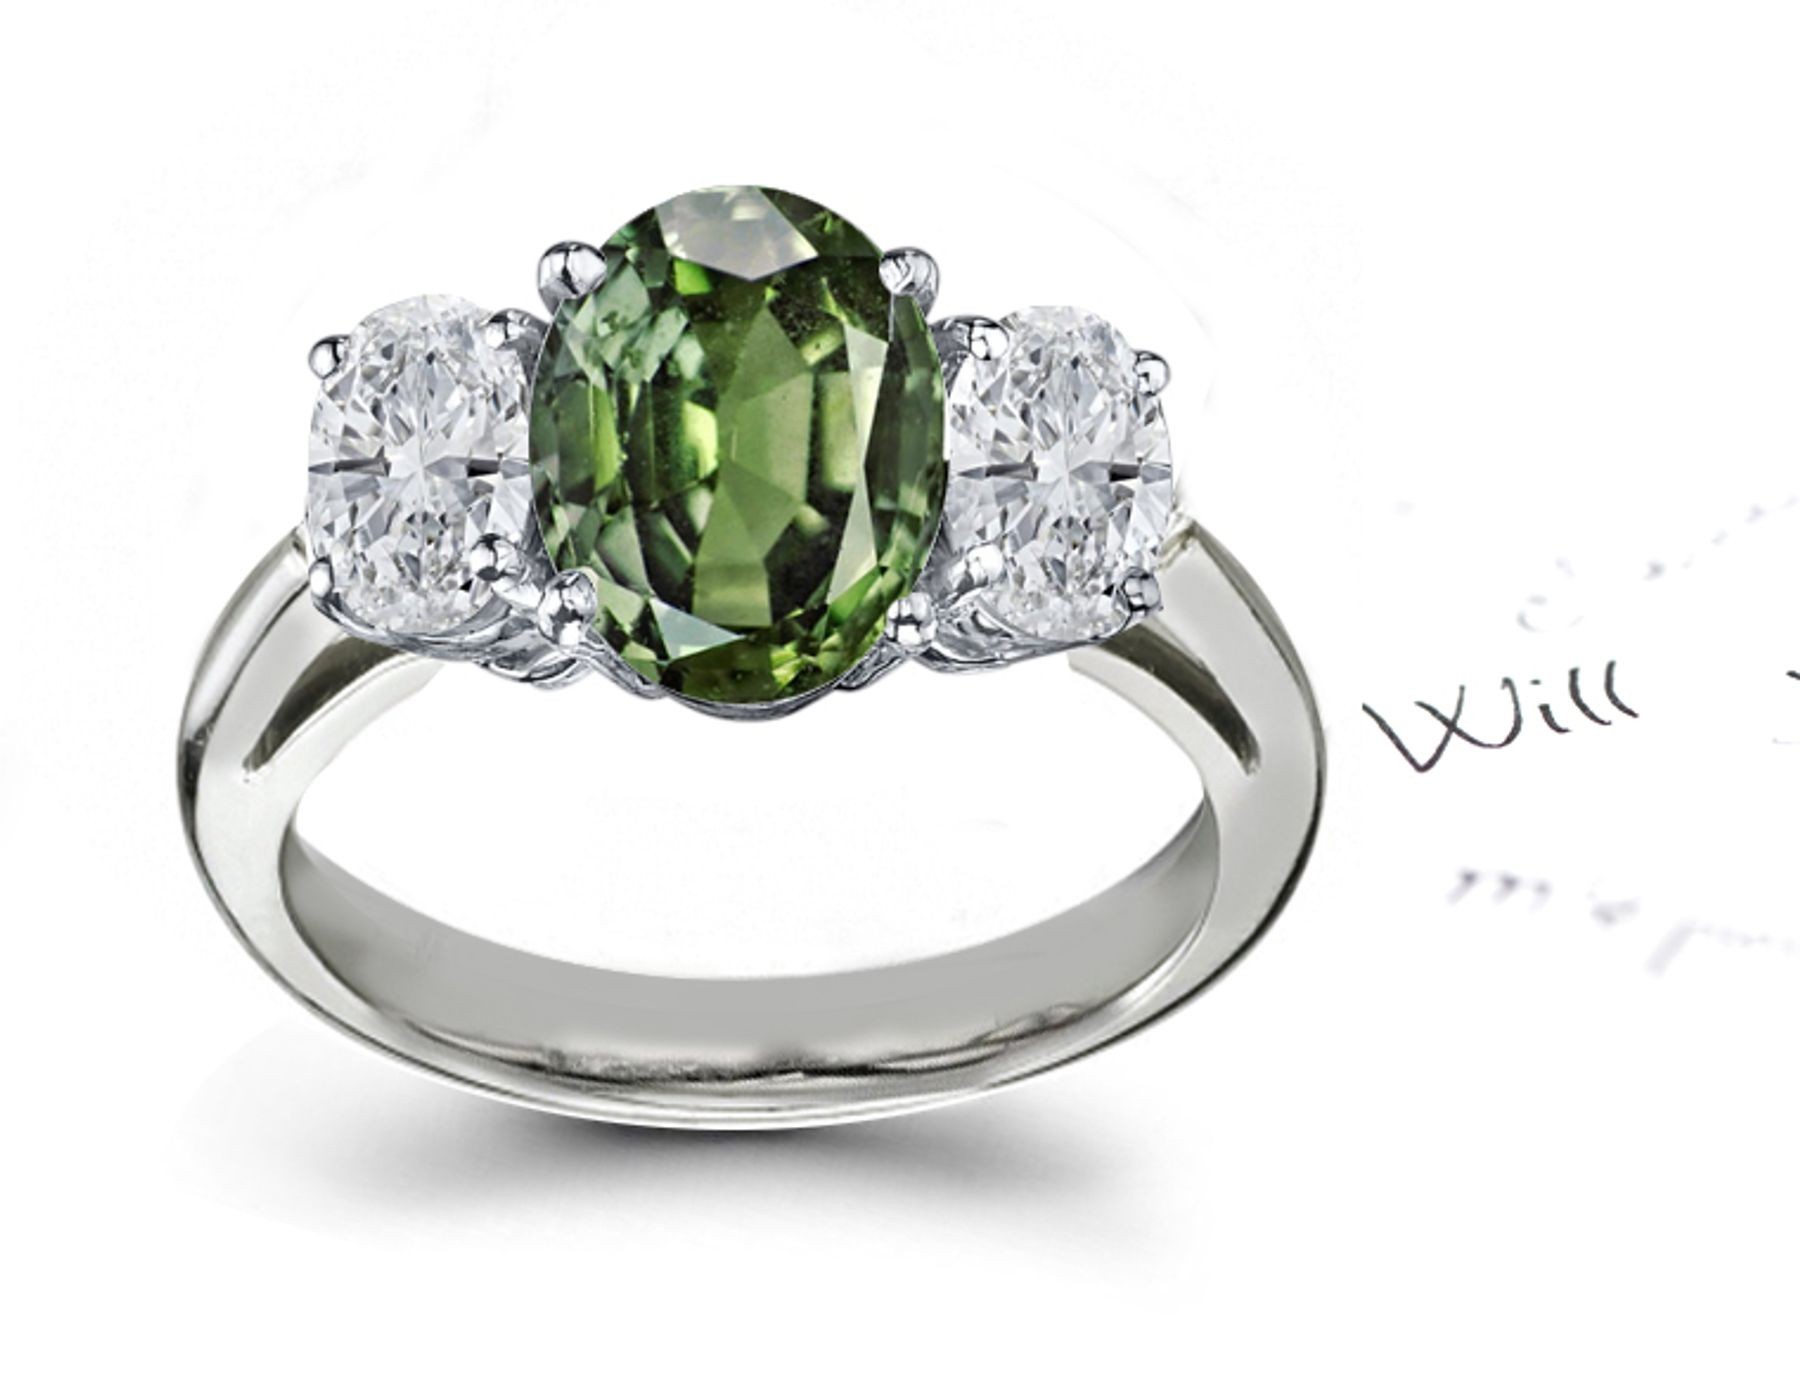 2013 Catalog No. 5 - Product Details: Green Sapphire and Diamond Engagement Ring